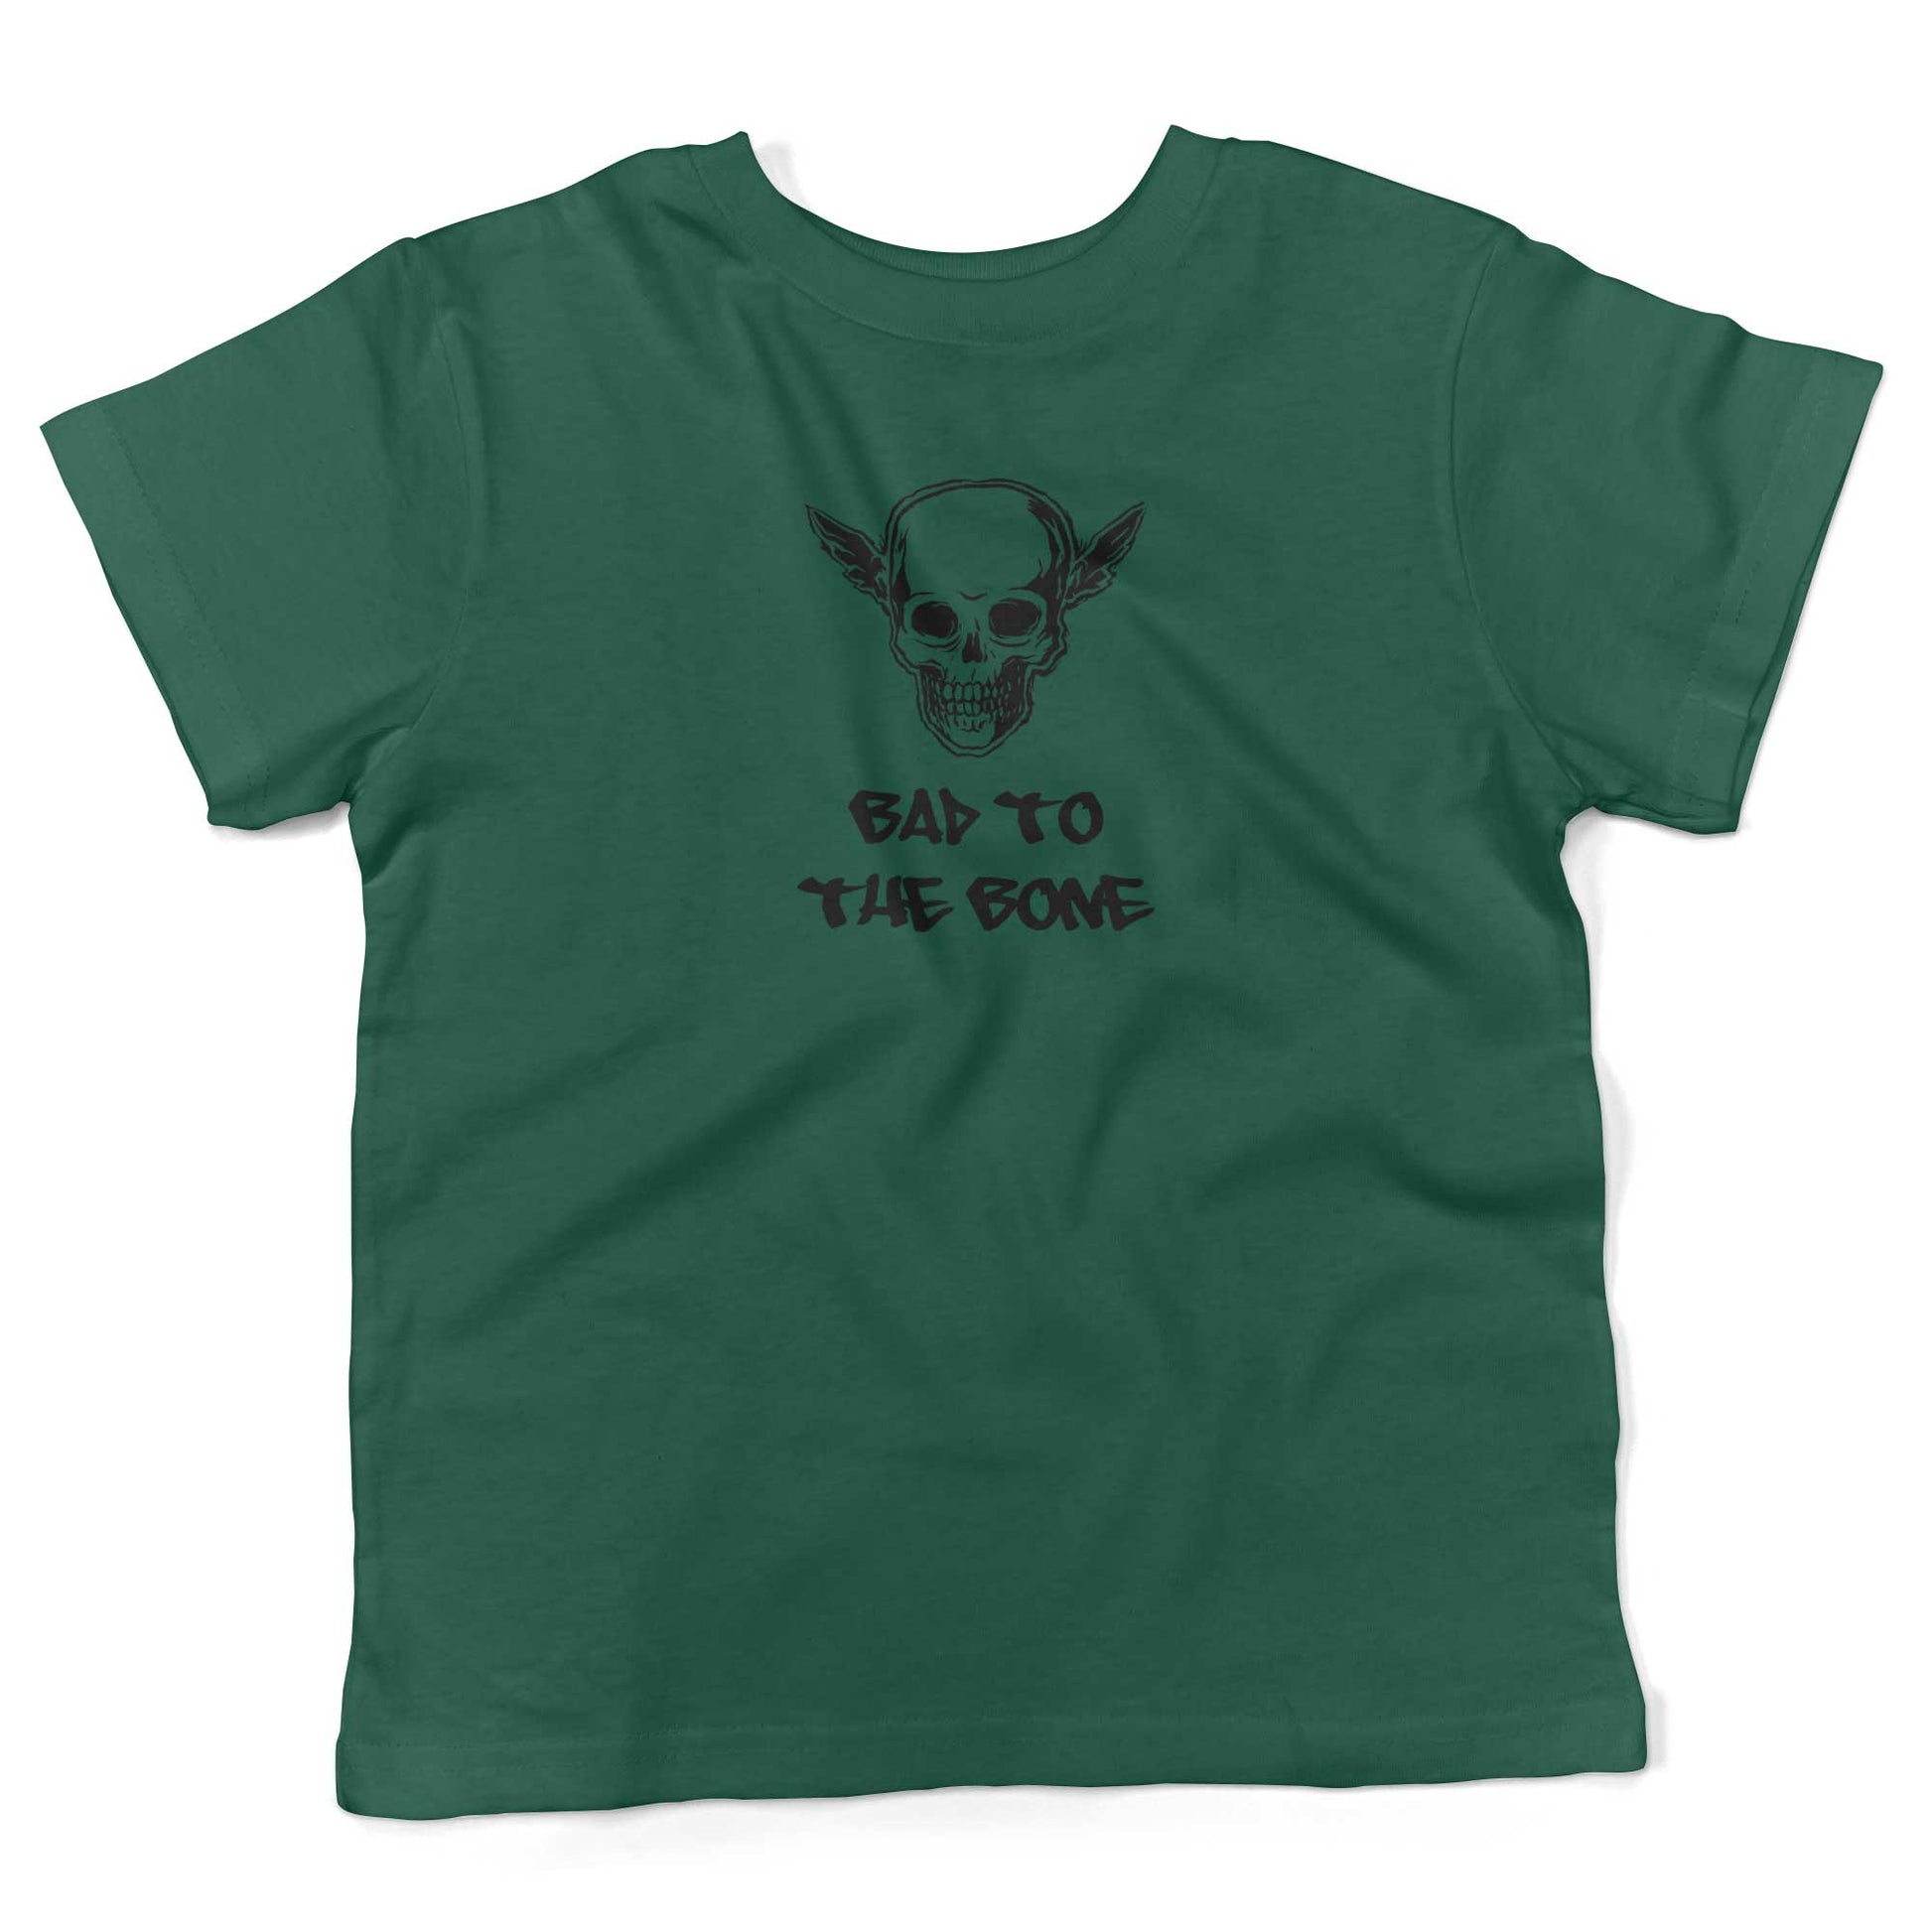 Bad To The Bone Toddler Shirt-Kelly Green-2T